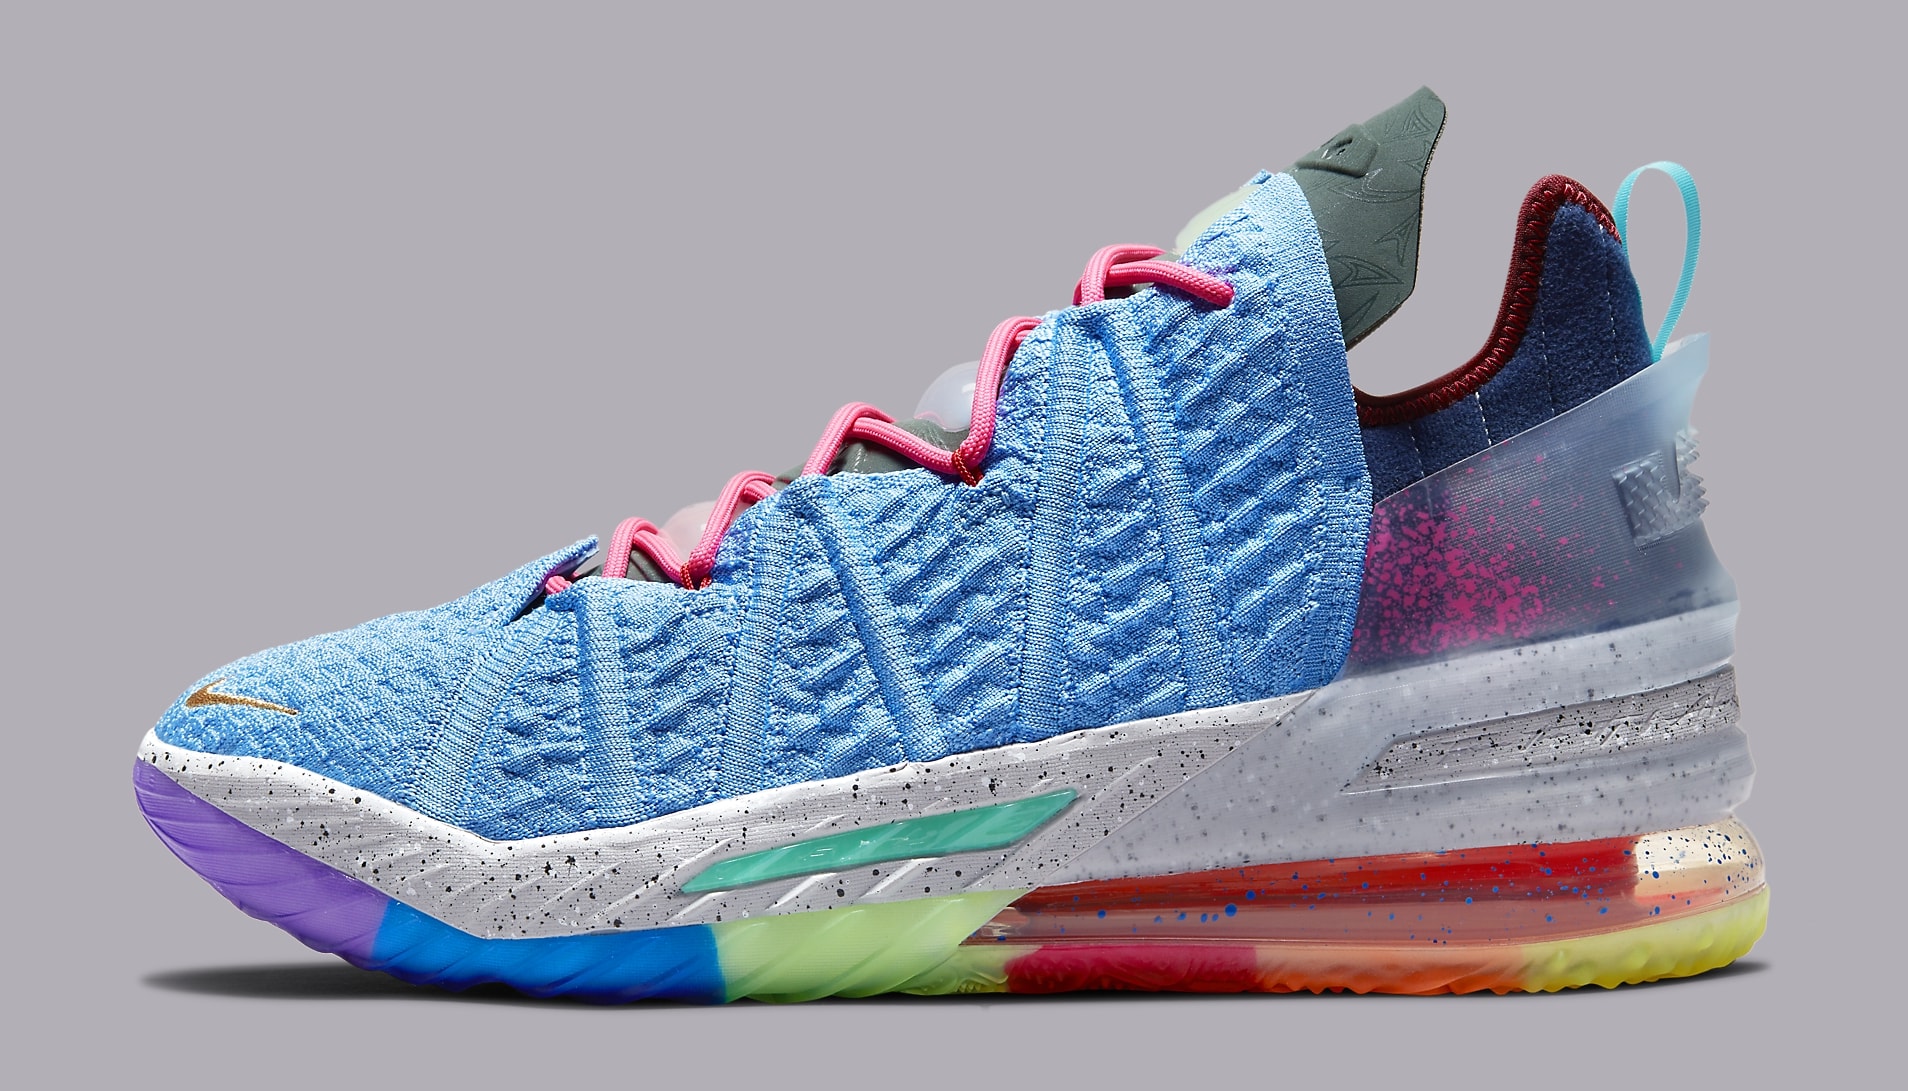 Nike LeBron 18 Details, Initial Release Colorways 